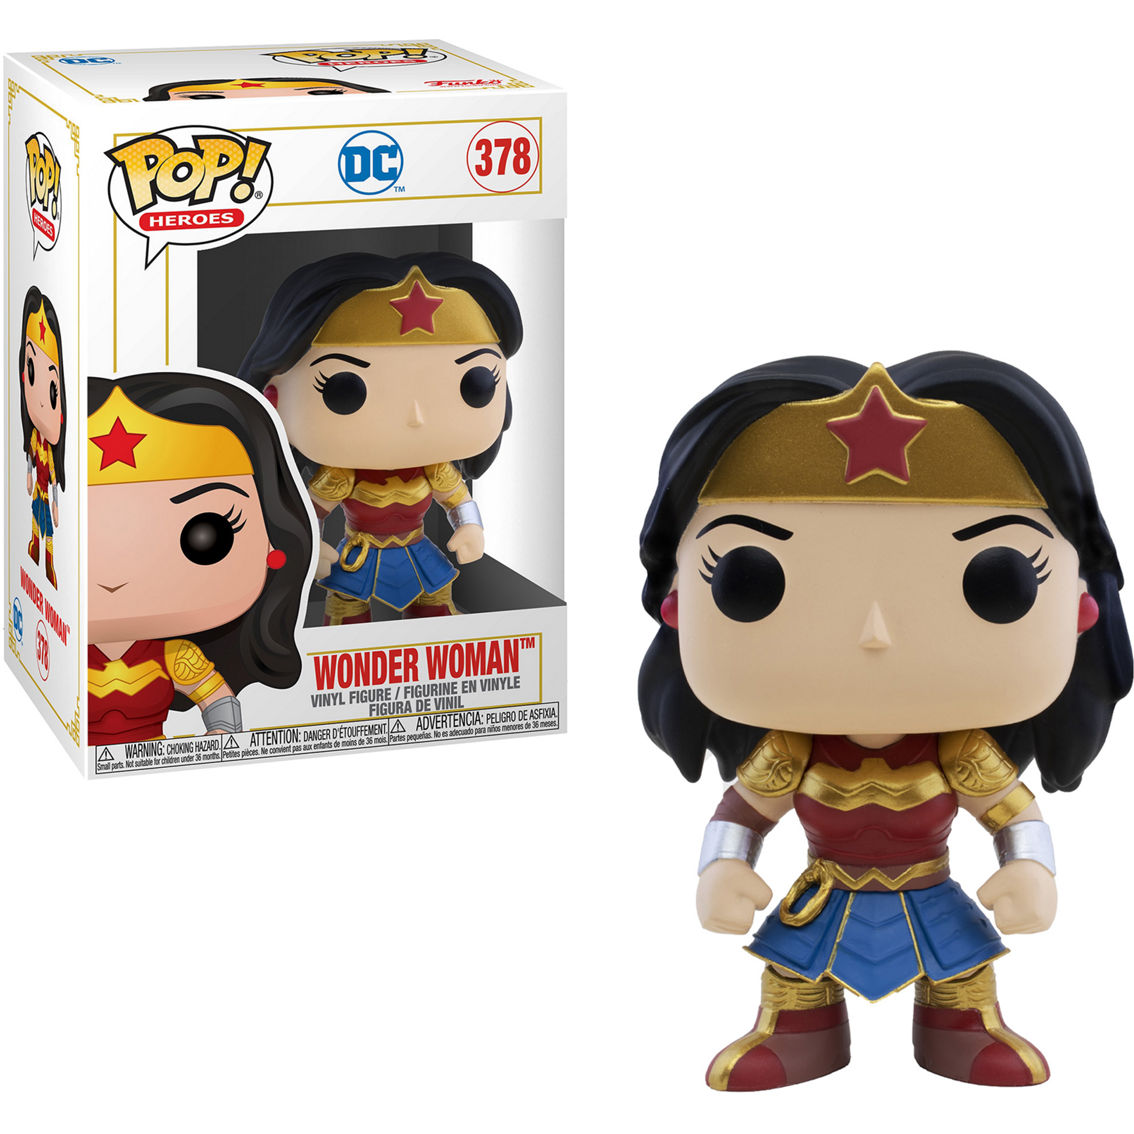 Funko POP! DC Heroes Imperial Palace Collector's Set - Image 6 of 7